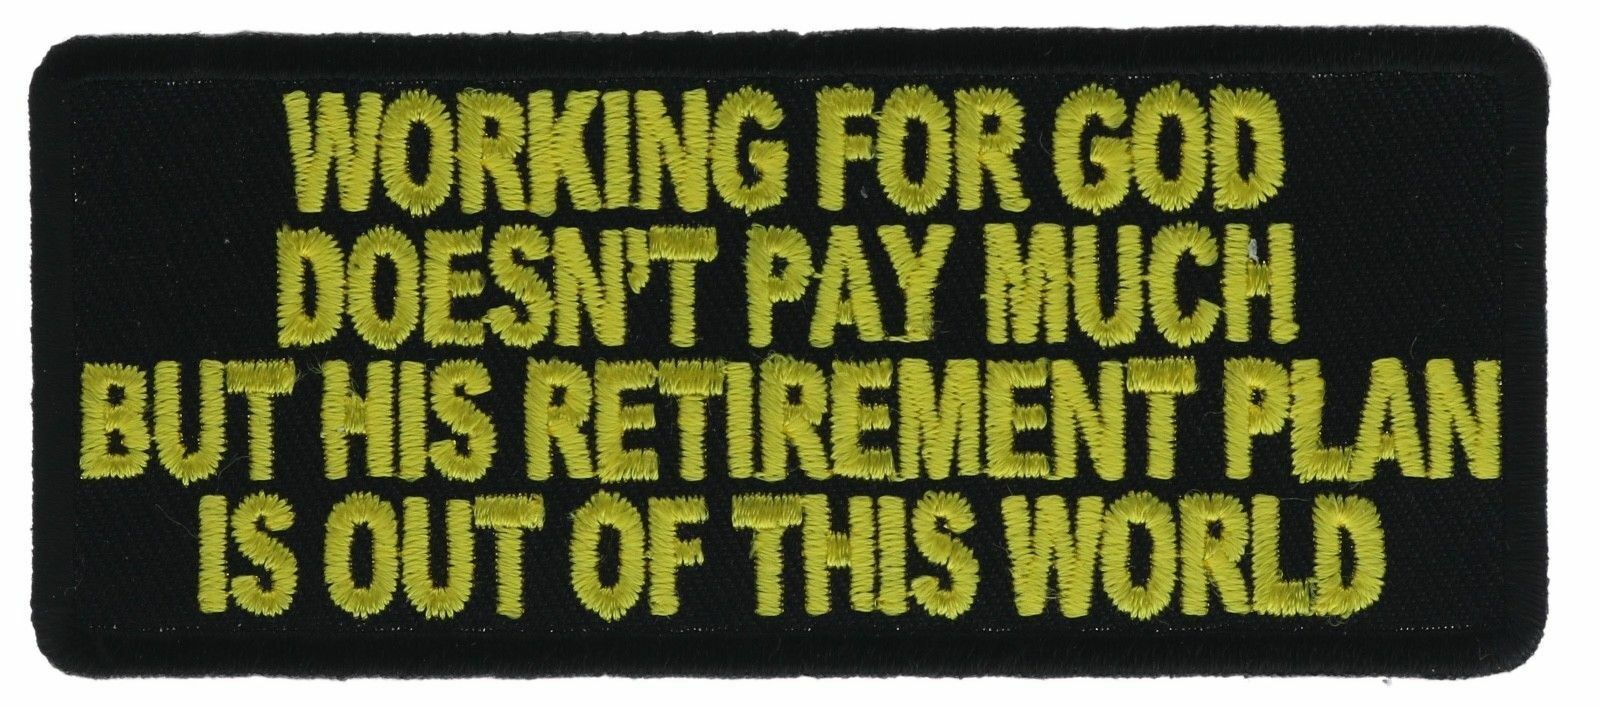 Working For God Doesn't Pay 3.5 Inch Hat Shoulder Patch IV2980 F2D13B